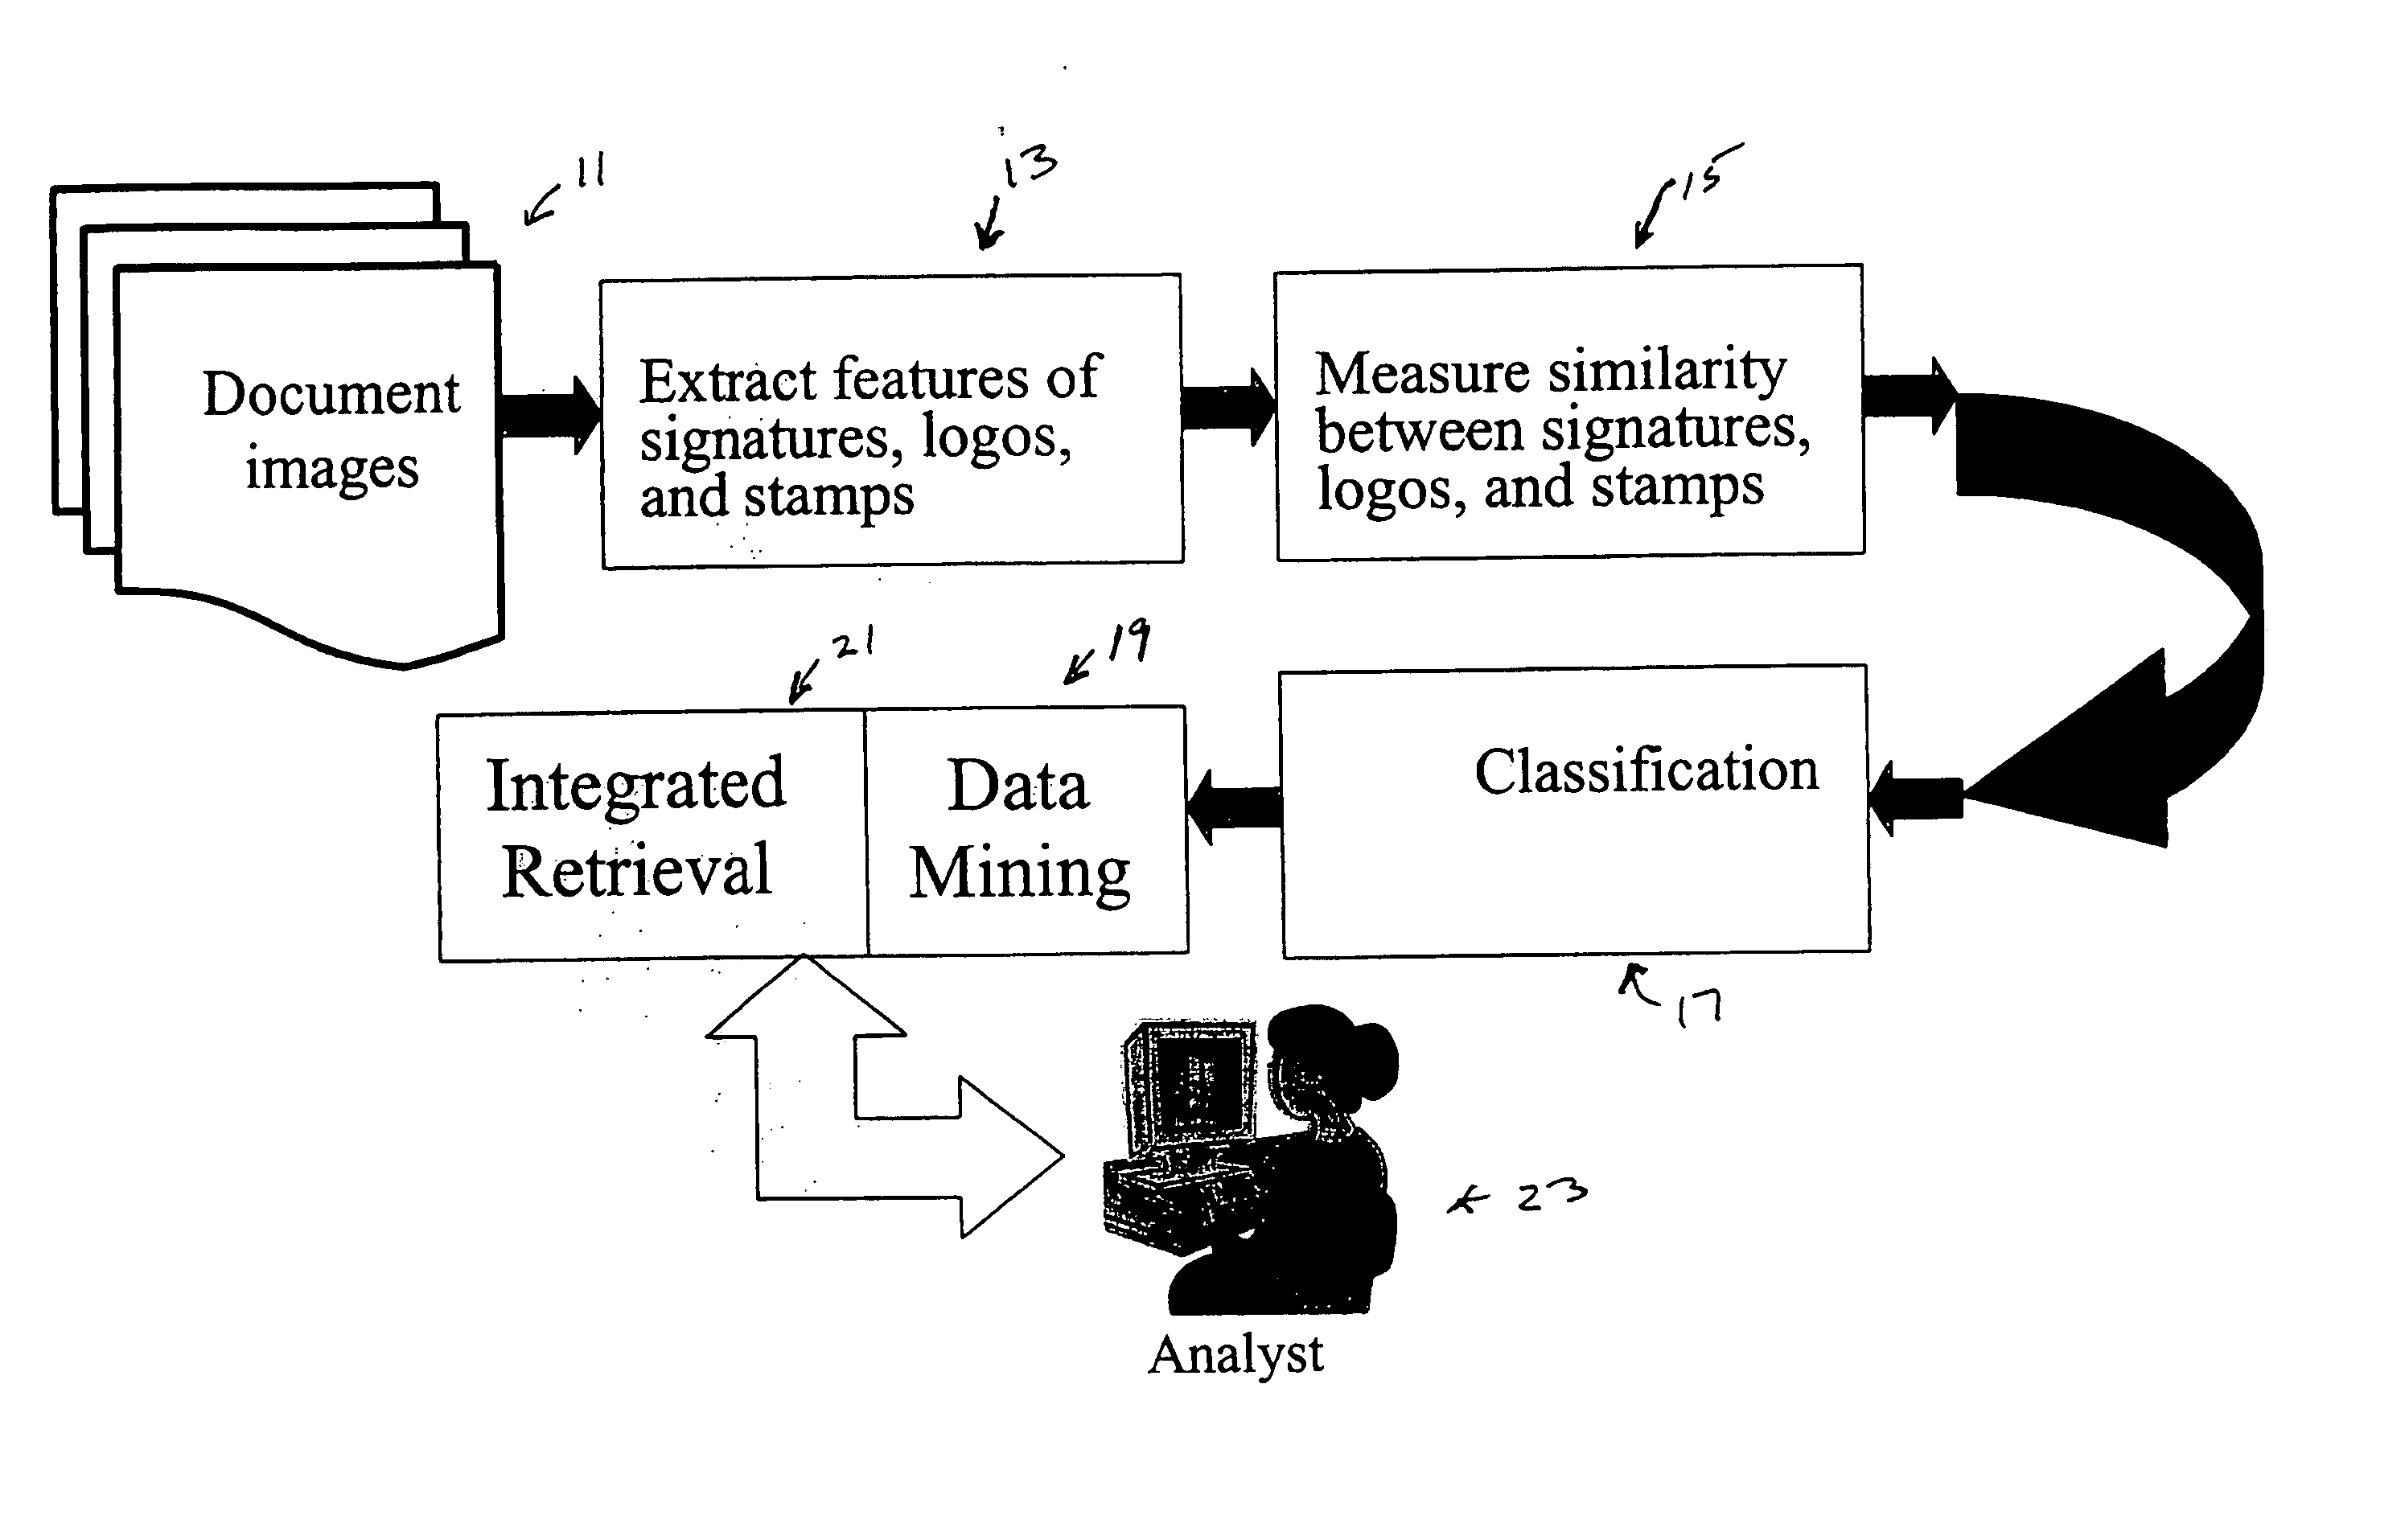 Image-based indexing and classification in image databases